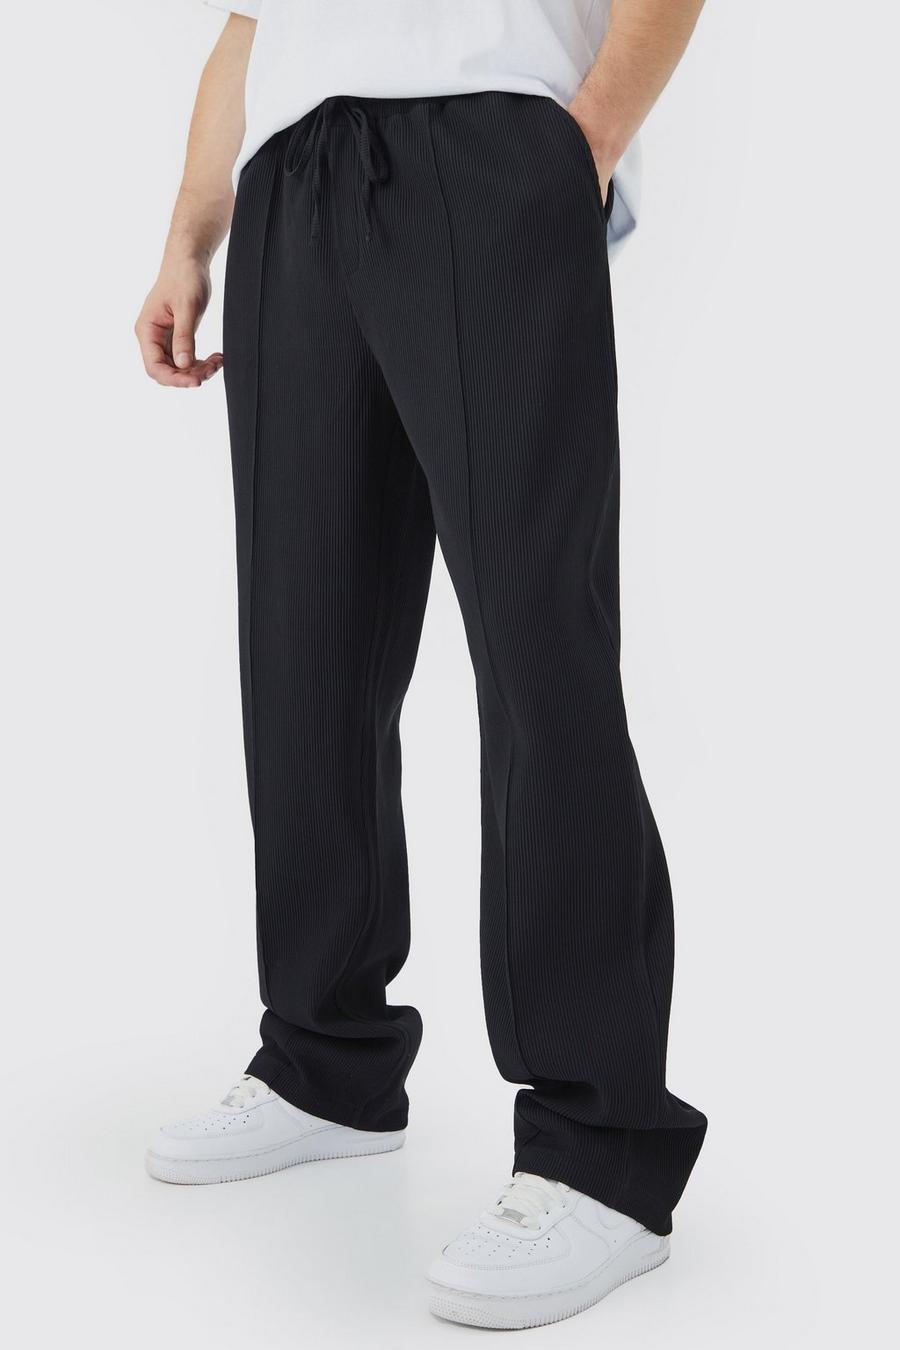 Black Tall Elastic Waist Relaxed Fit Pleated Trouser